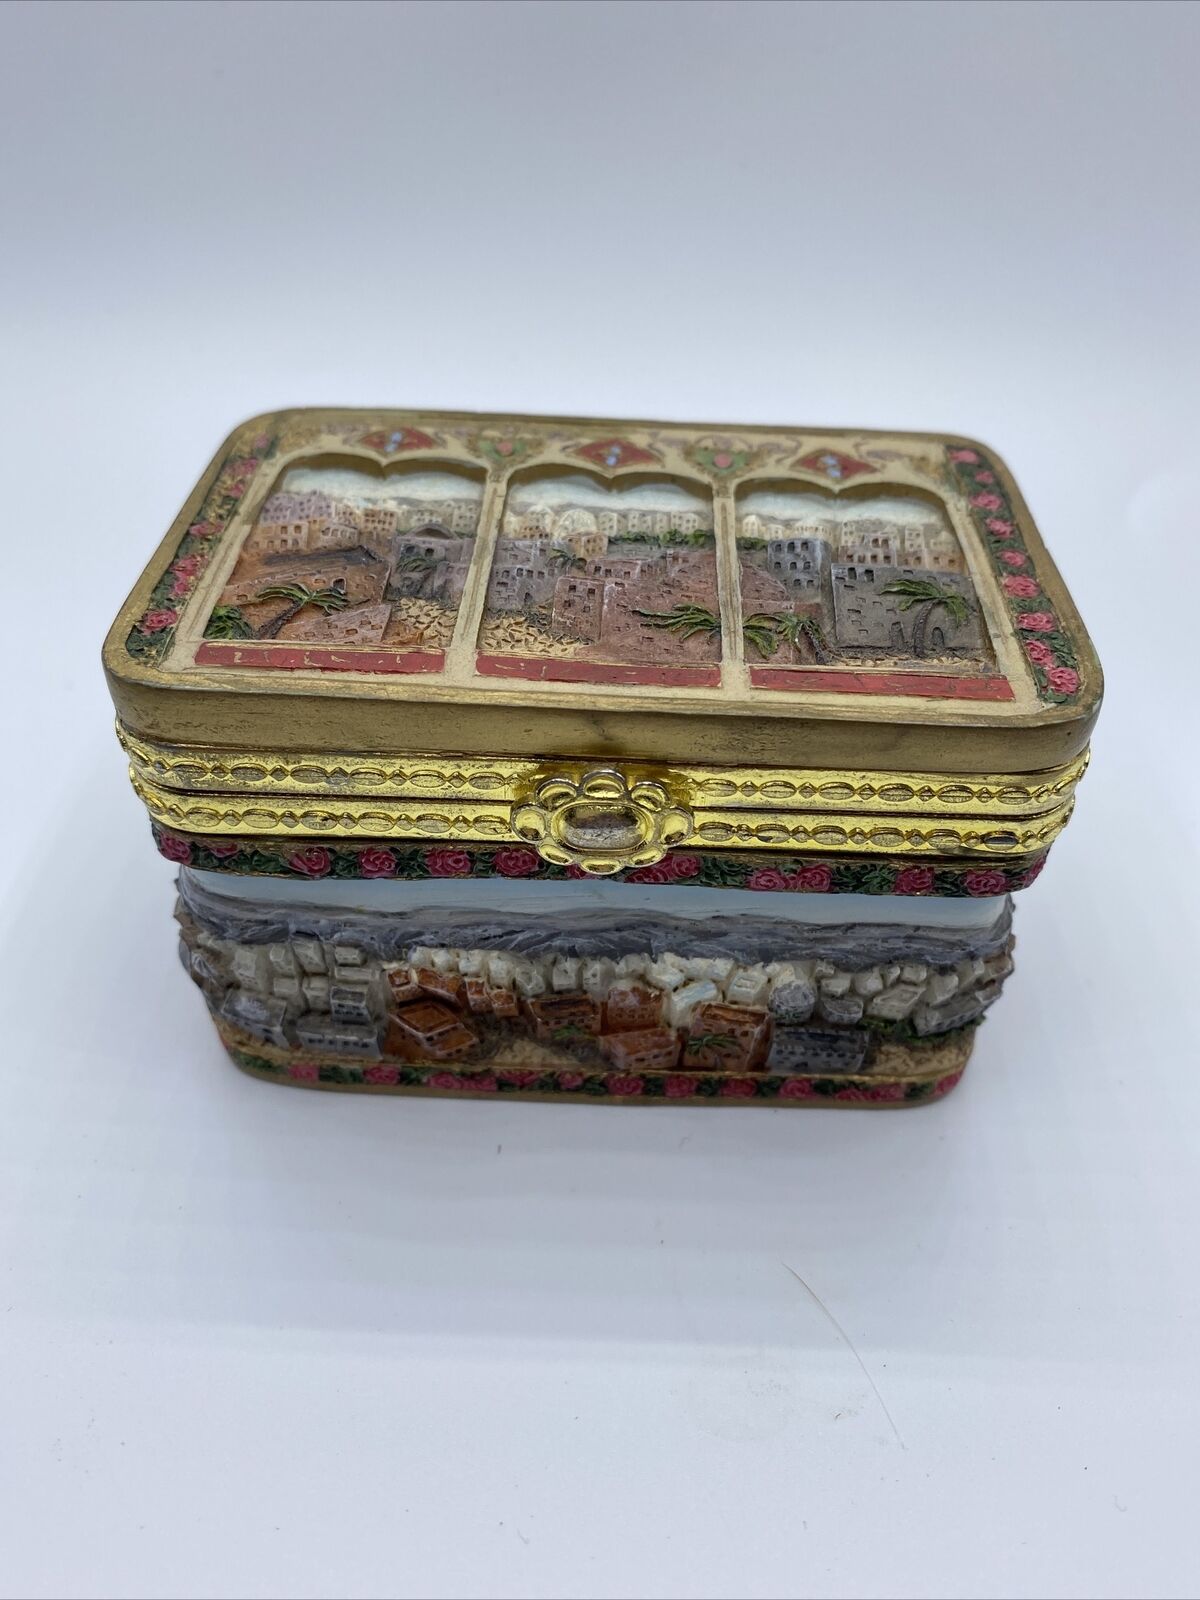 Vintage Middle East Country Theme Trinket Jewelry Box with Black Lining